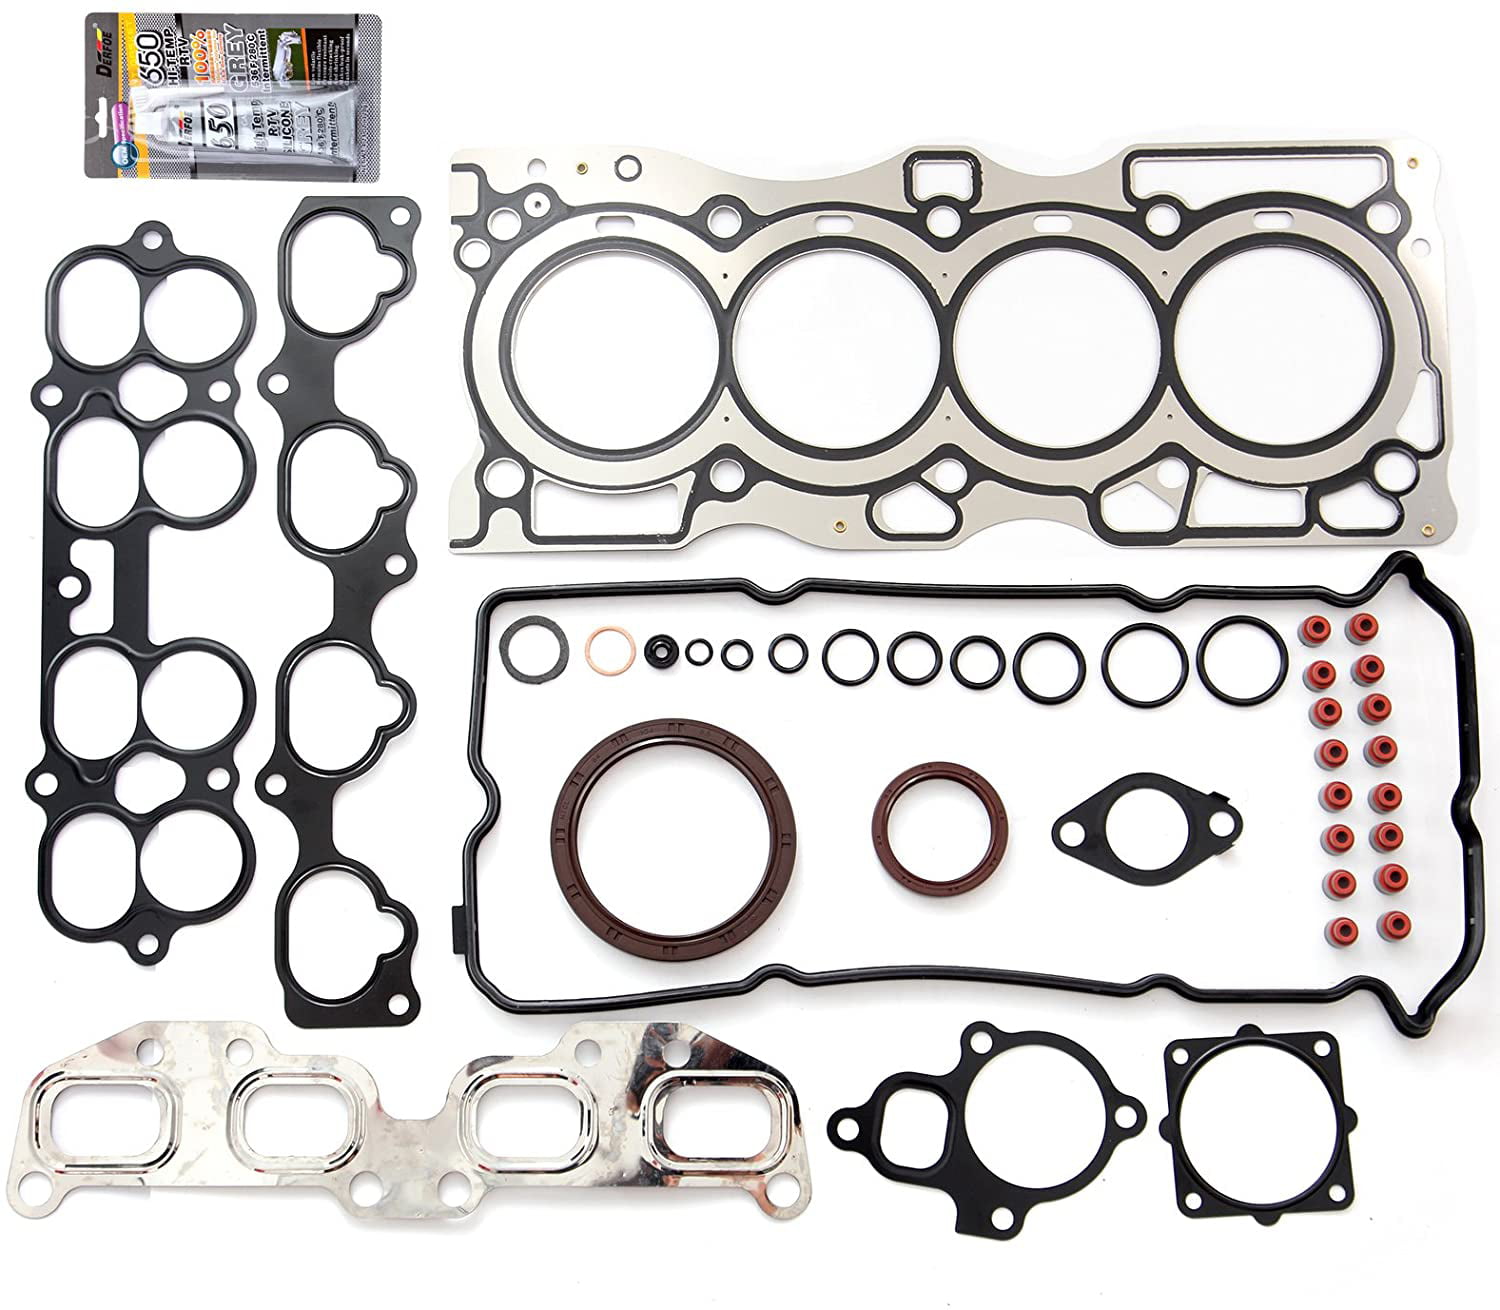 SCITOO Timing Chain Cover Gasket Kit Set Replacement for Lincoln Mark LT 4-Door Crew Cab Pickup 5.4L Base 